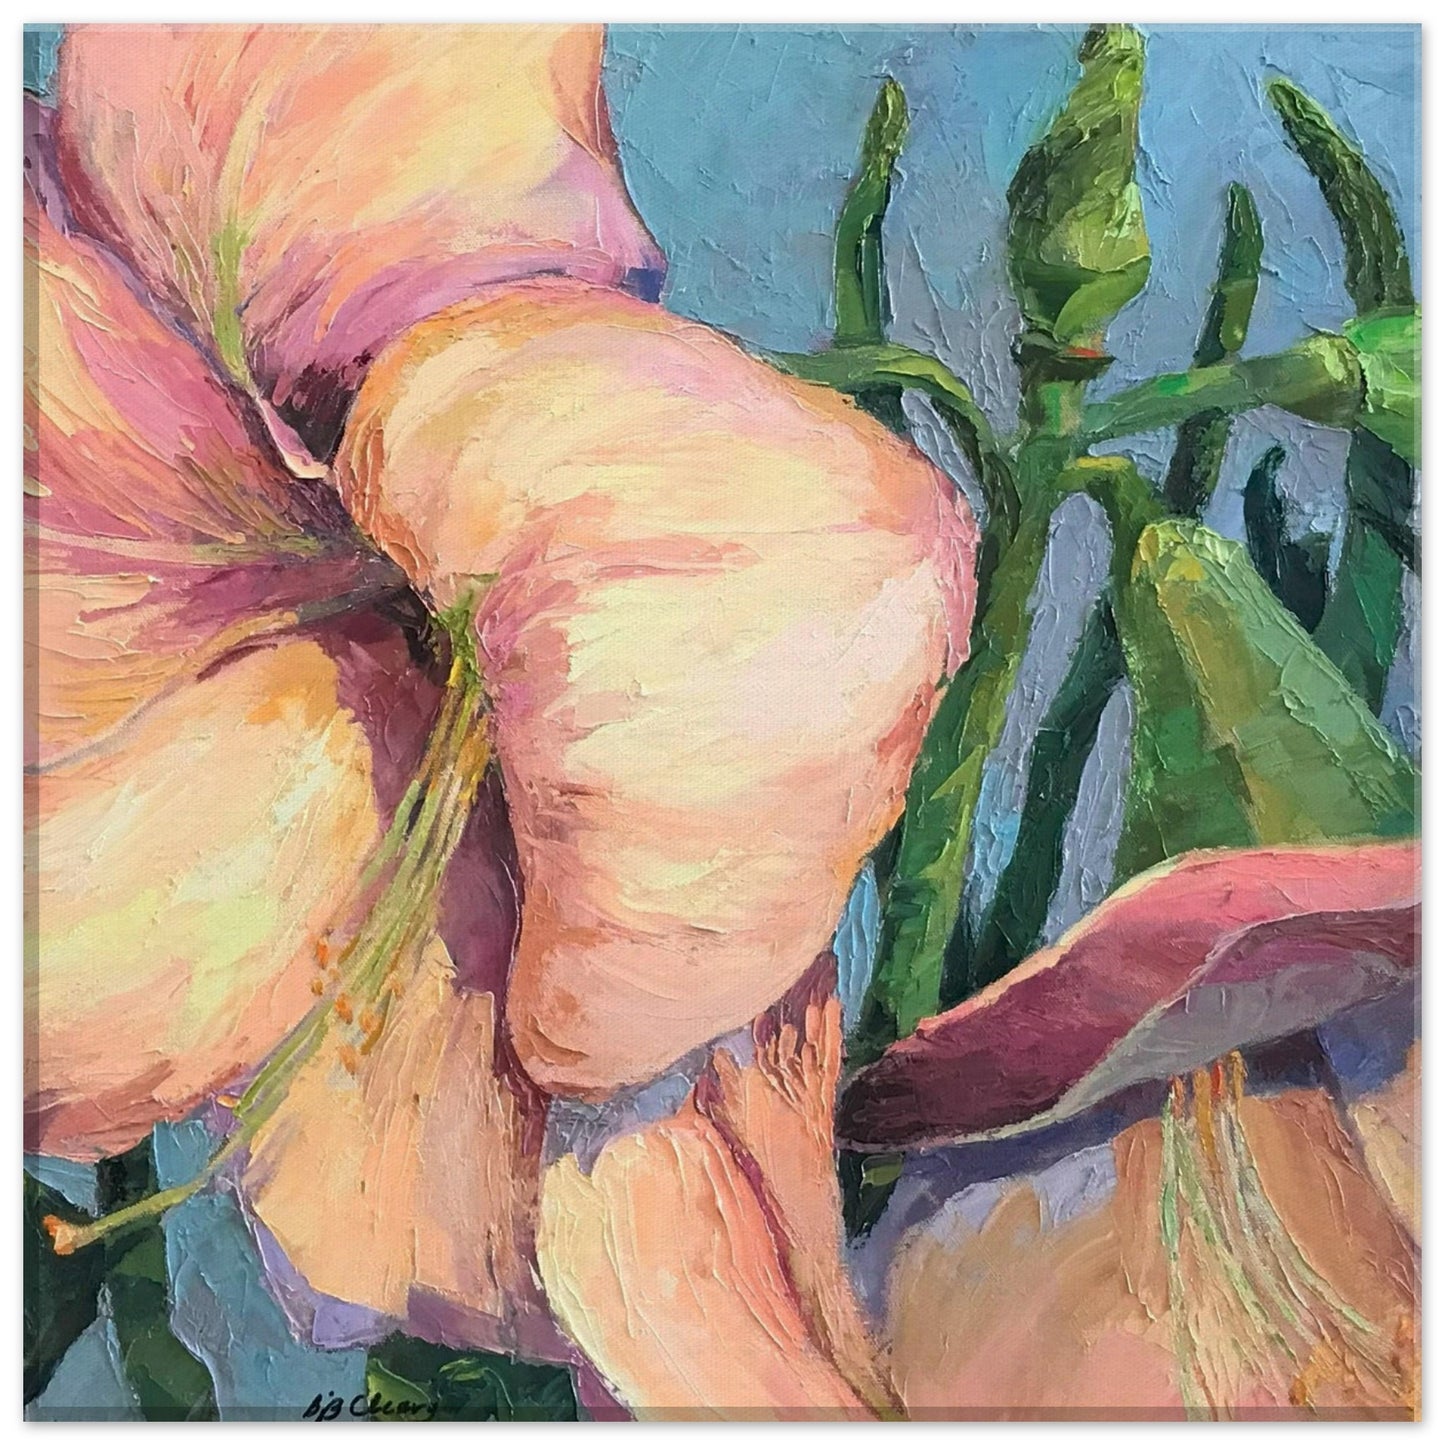 "Amaryllis 2" Floral Print 12x12 inch on Canvas Barbara Cleary Designs